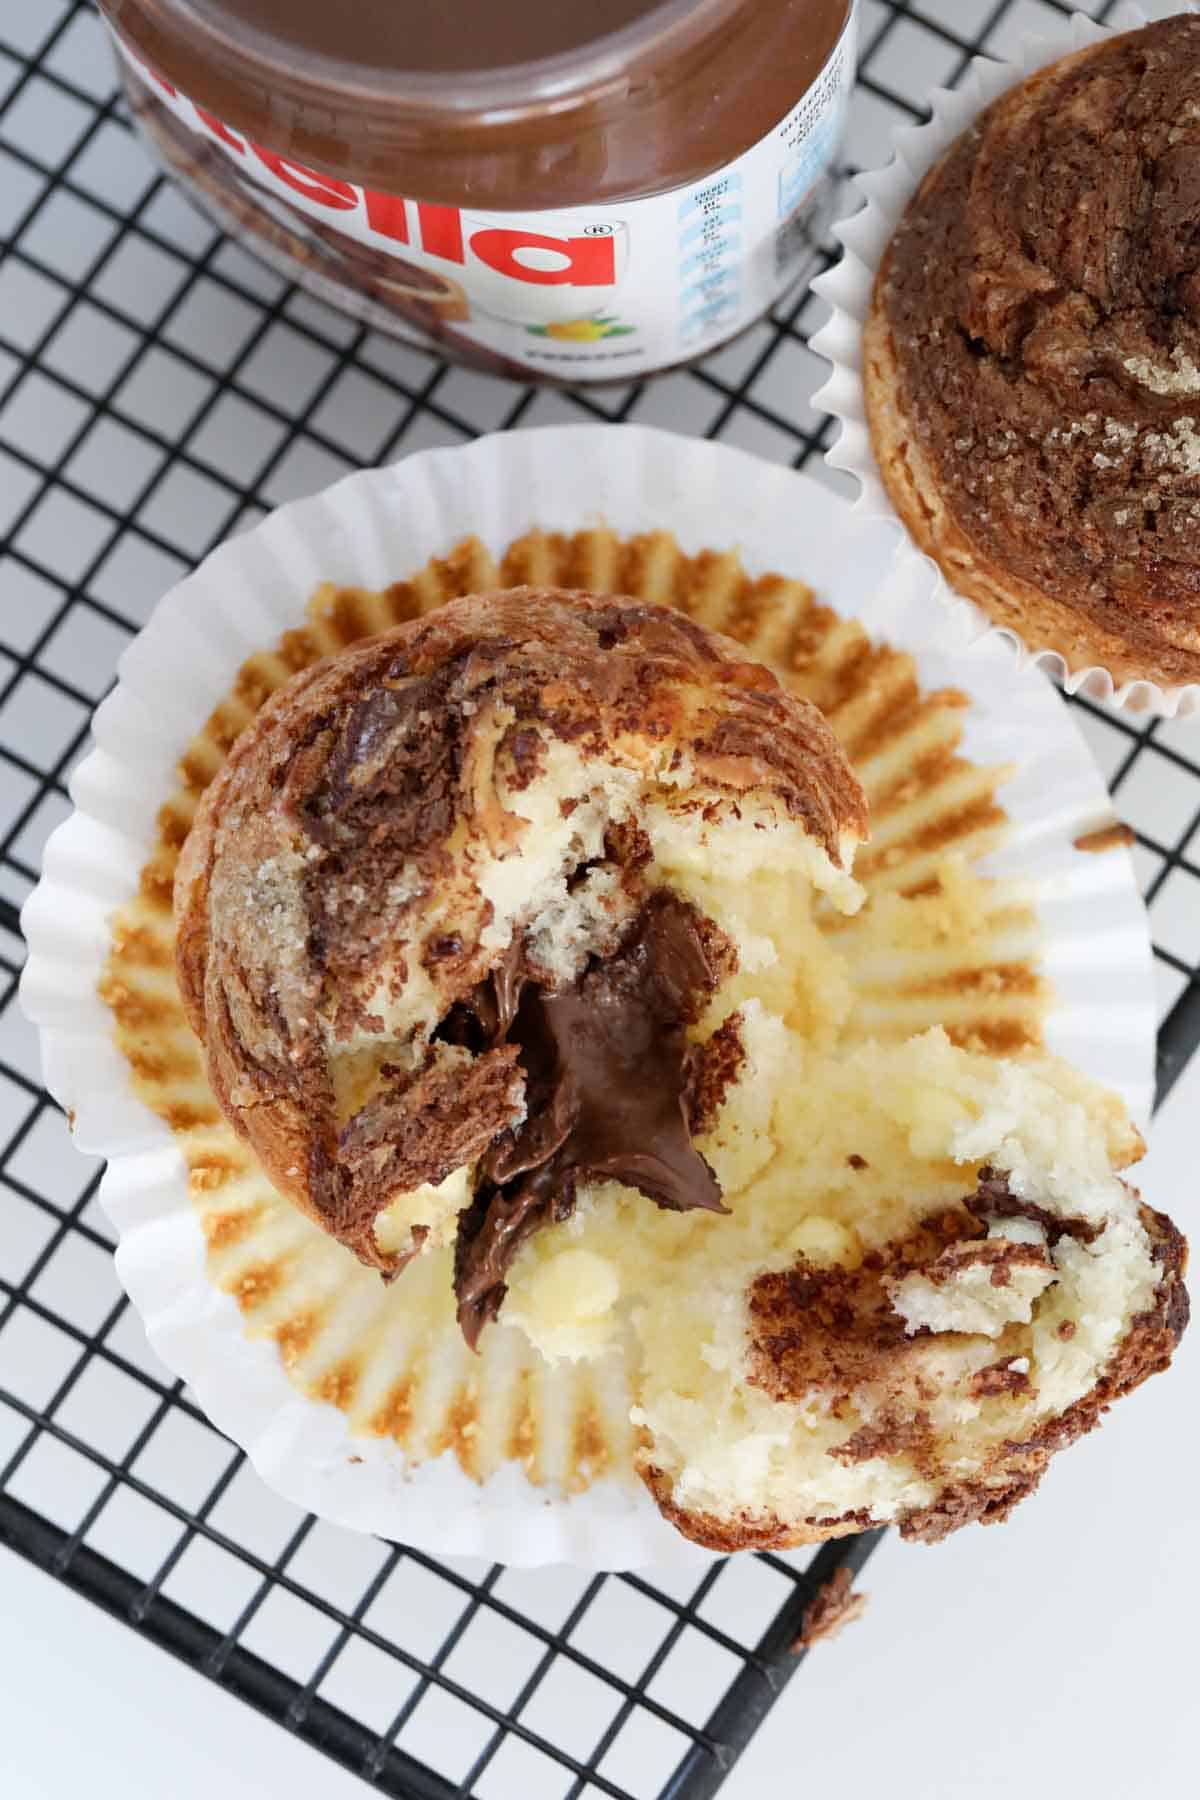 An overhead shot of Nutella oozing out of a muffin split in half.